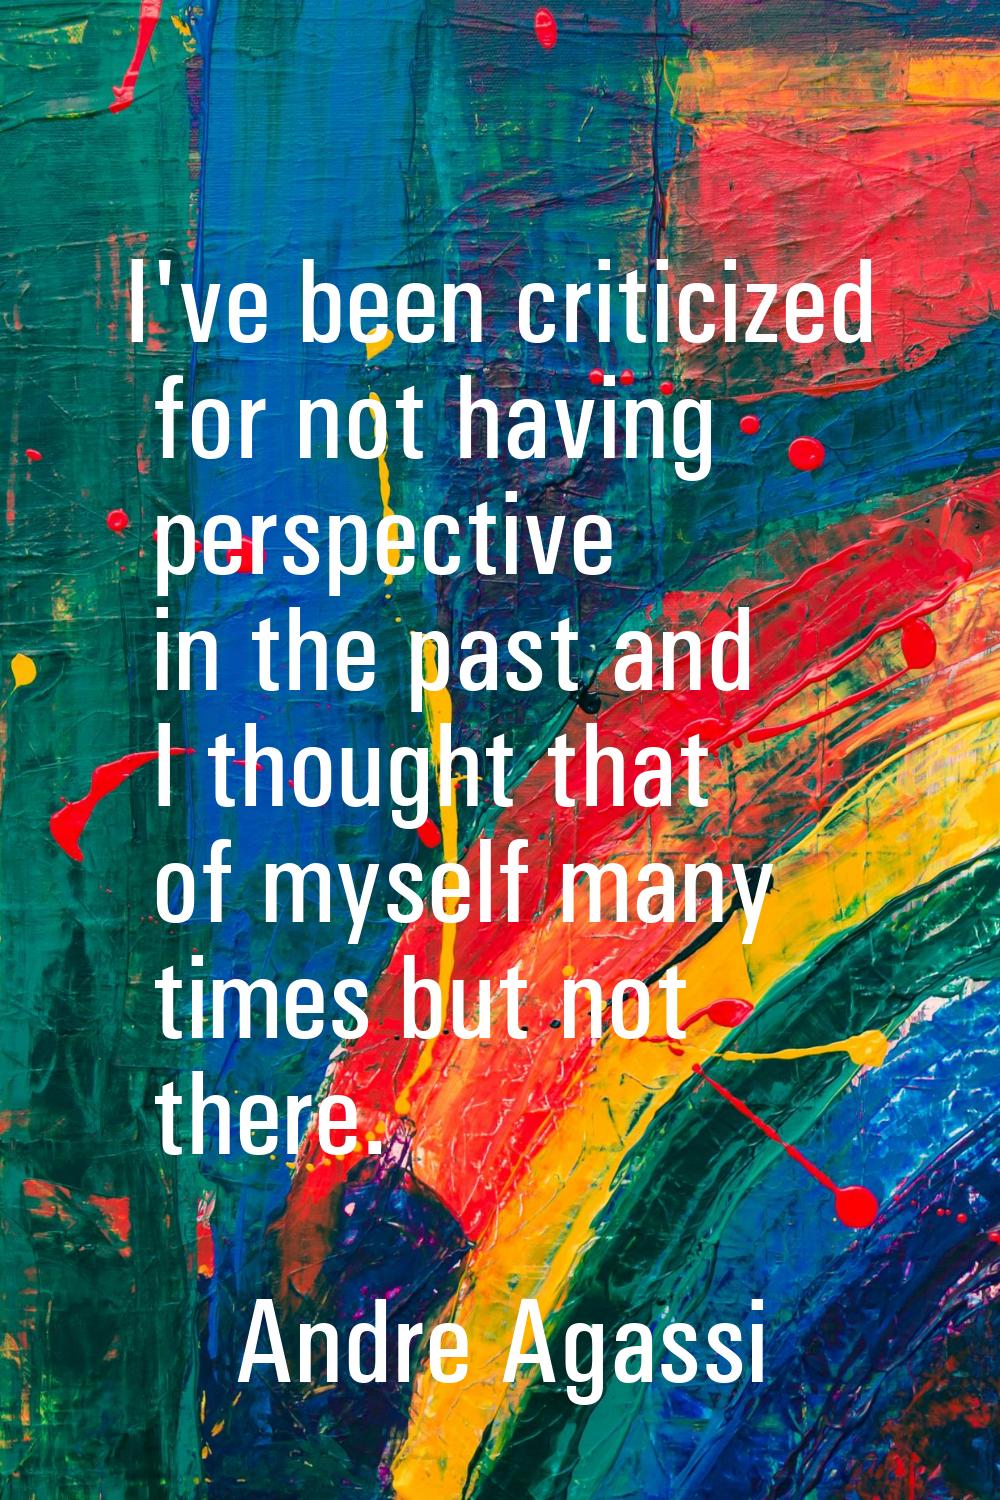 I've been criticized for not having perspective in the past and I thought that of myself many times